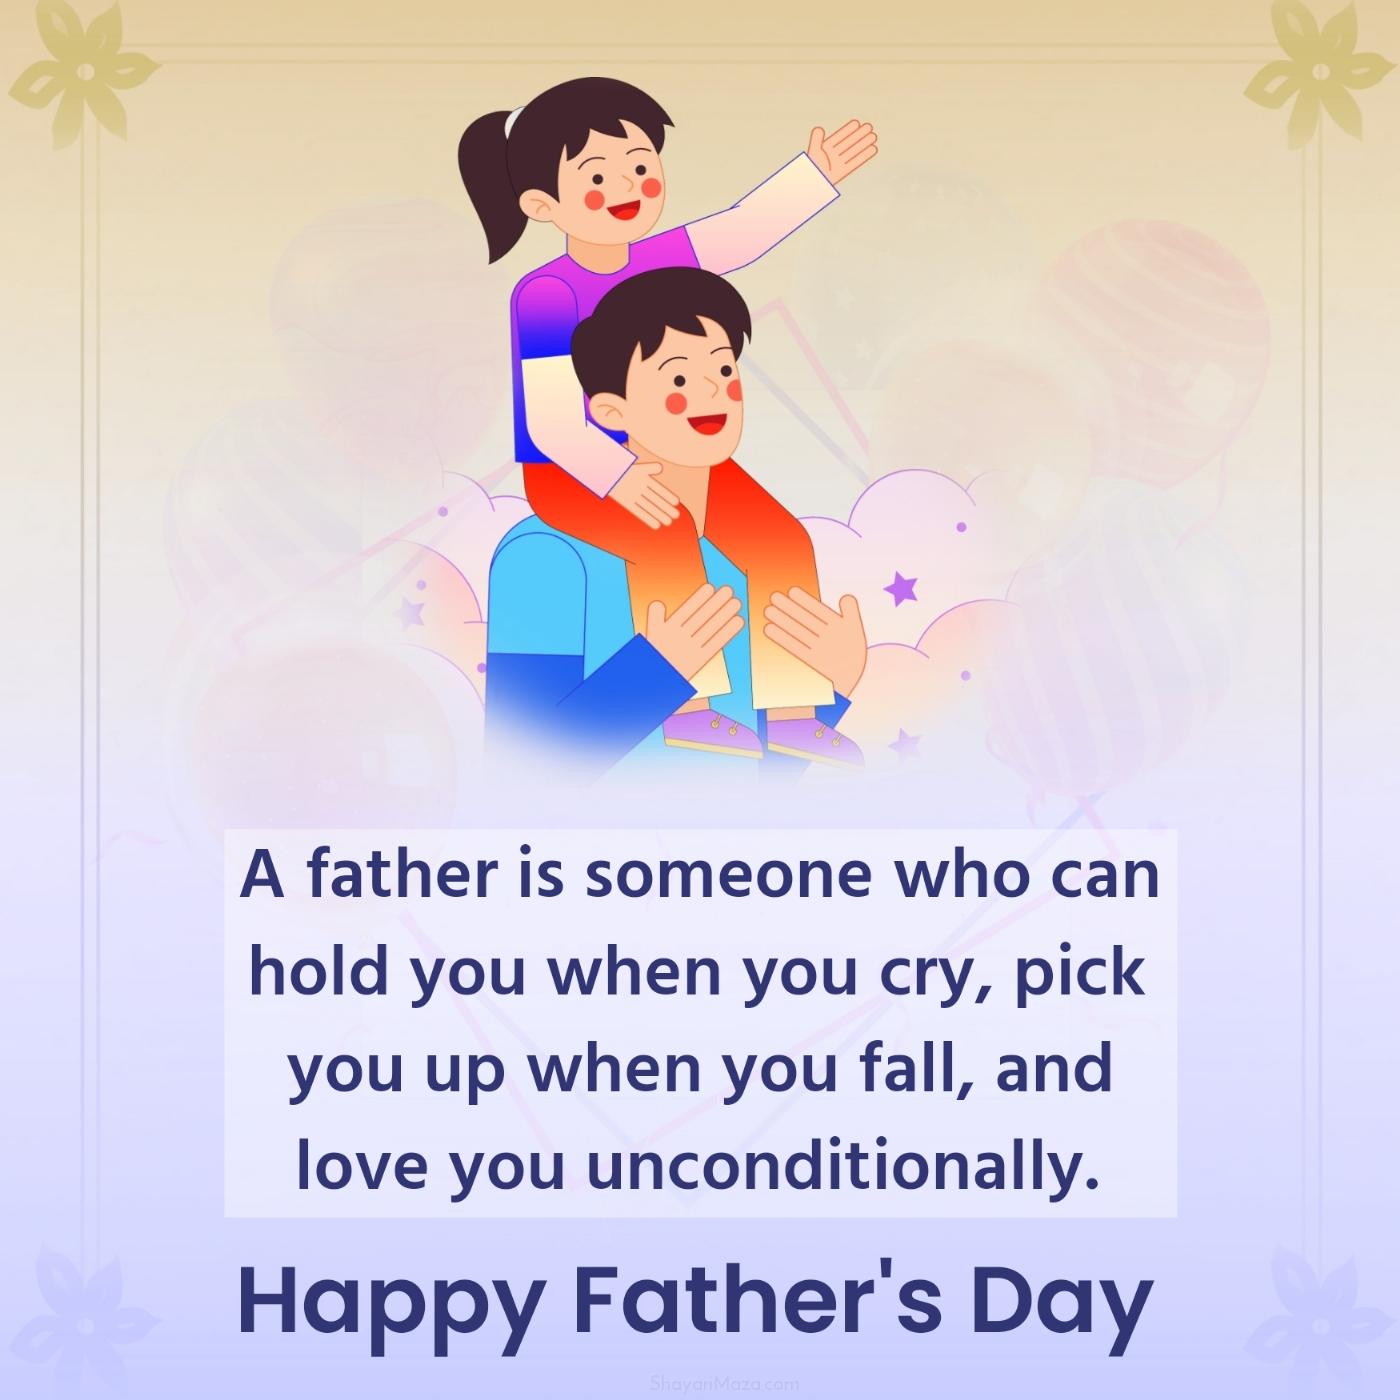 A father is someone who can hold you when you cry